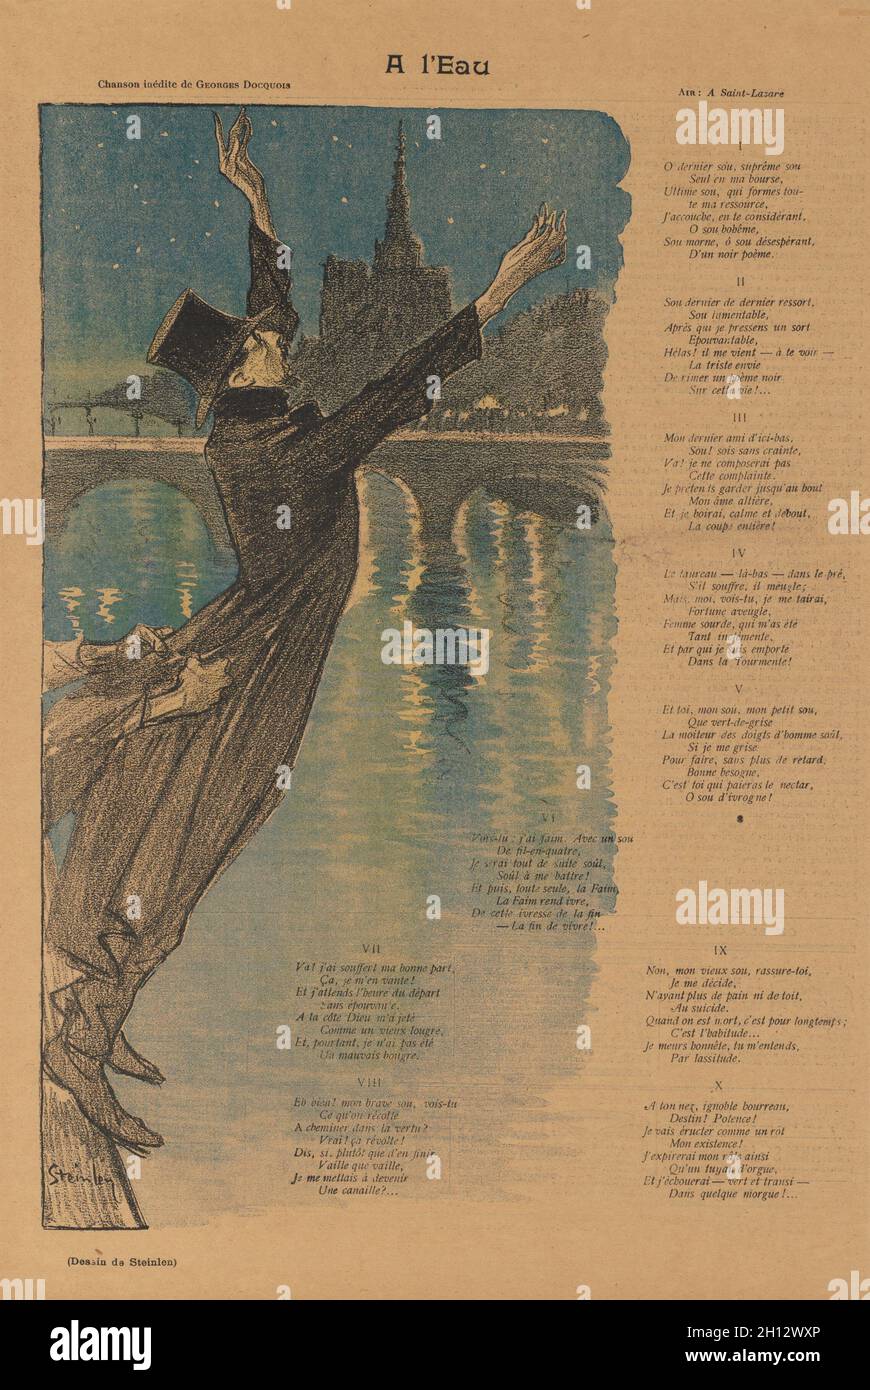 Illustration for the song, 'A l'Eau', by George Docquois appearing on the last page of October 23, 1896 publication of 'Gil Blas Illustré': Gil Blas Illustré: At the Water's Edge (A l'Eau), 1896. Théophile Alexandre Steinlen (Swiss, 1859-1923). Color lithograph; sheet: 39.2 x 26.3 cm (15 7/16 x 10 3/8 in.); image: 33.3 x 17.4 cm (13 1/8 x 6 7/8 in.). Stock Photo